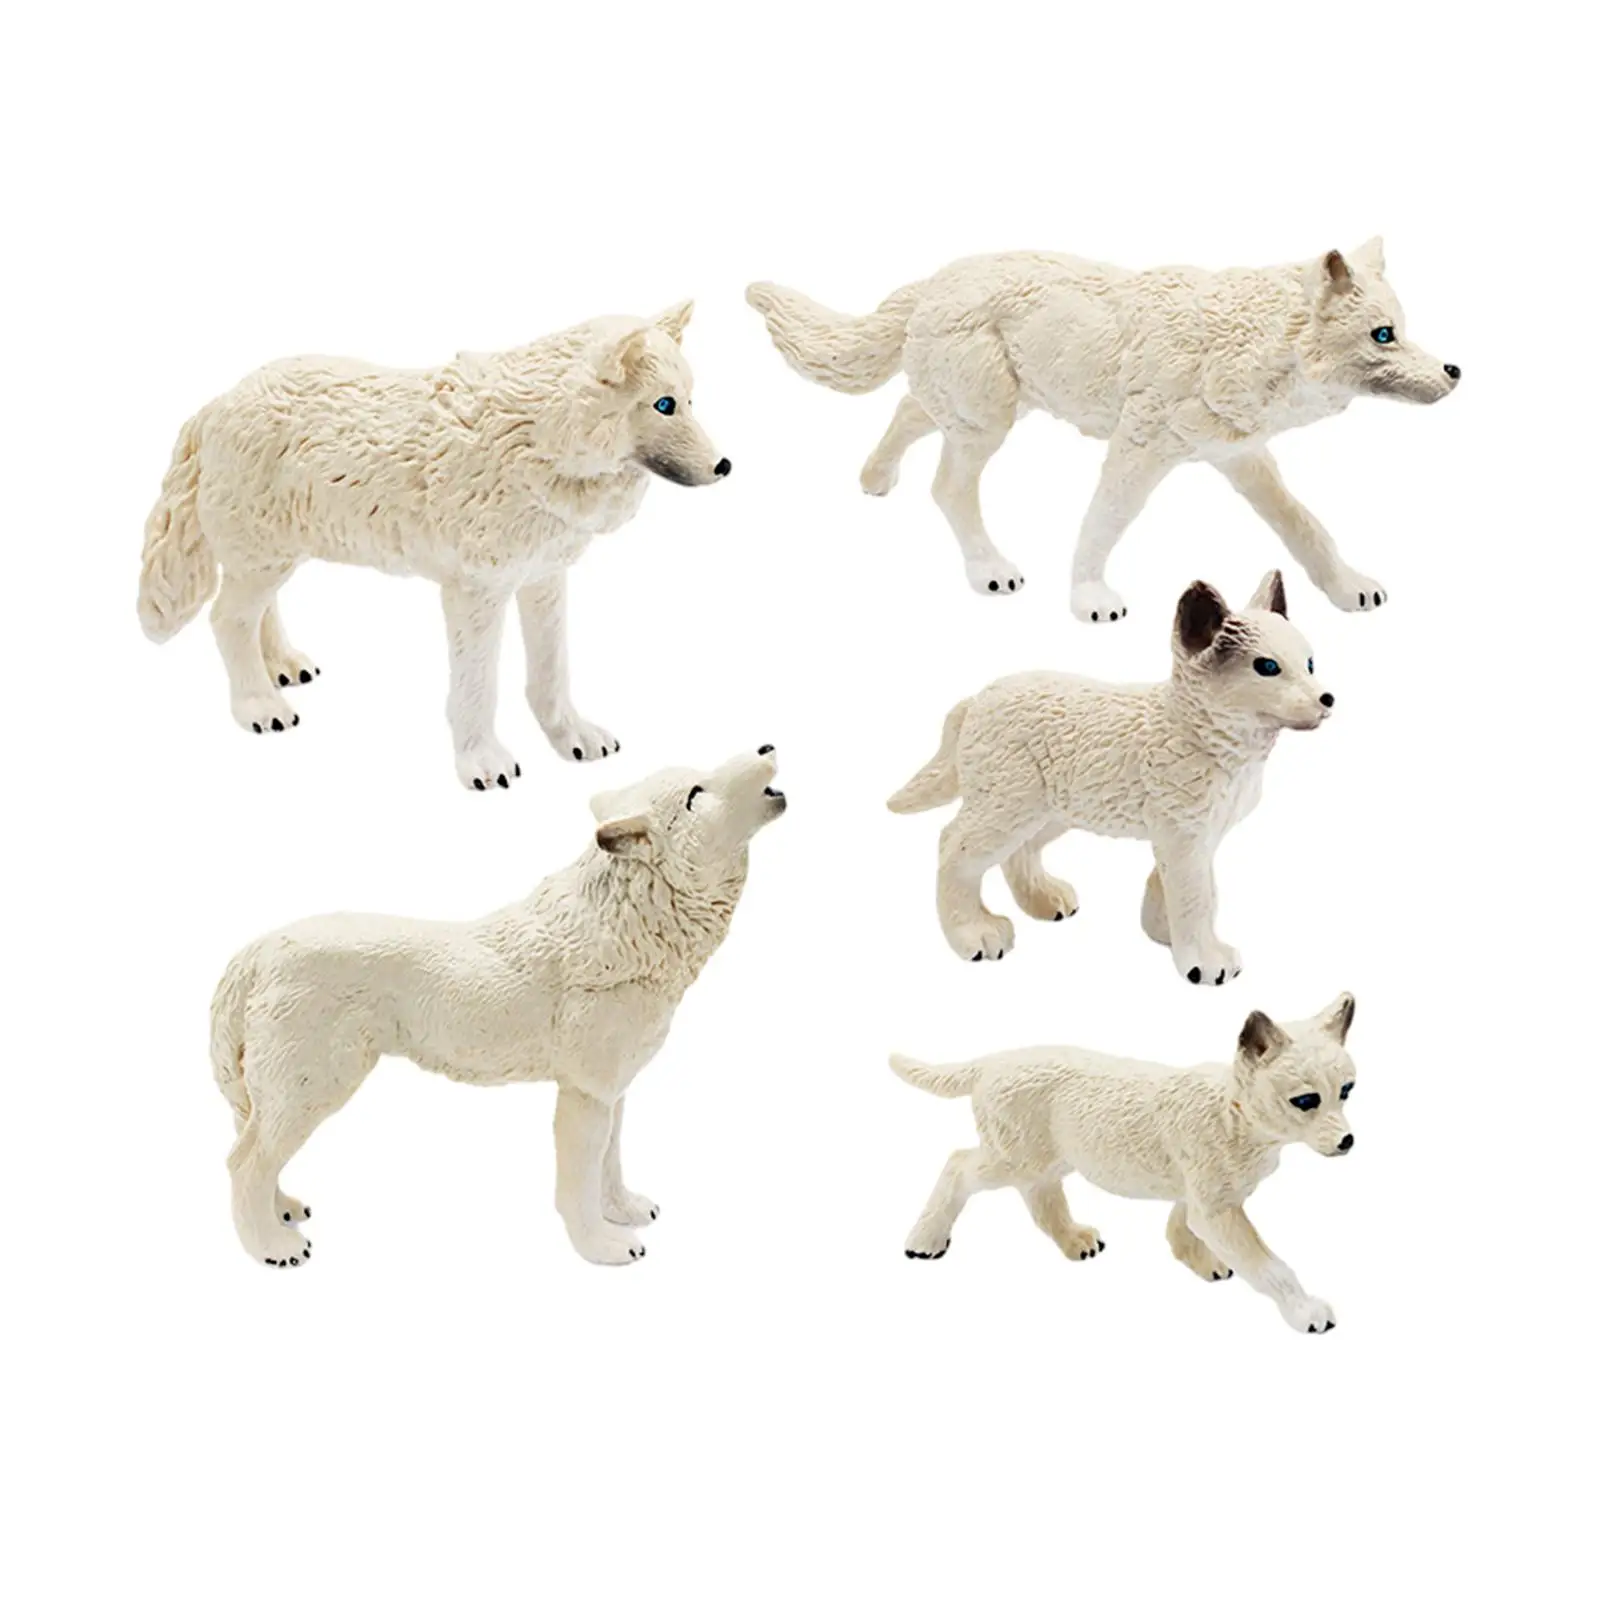 5 Pieces Wolf Toy Figurines for Educational Toys Cake Topper Desktop Decor